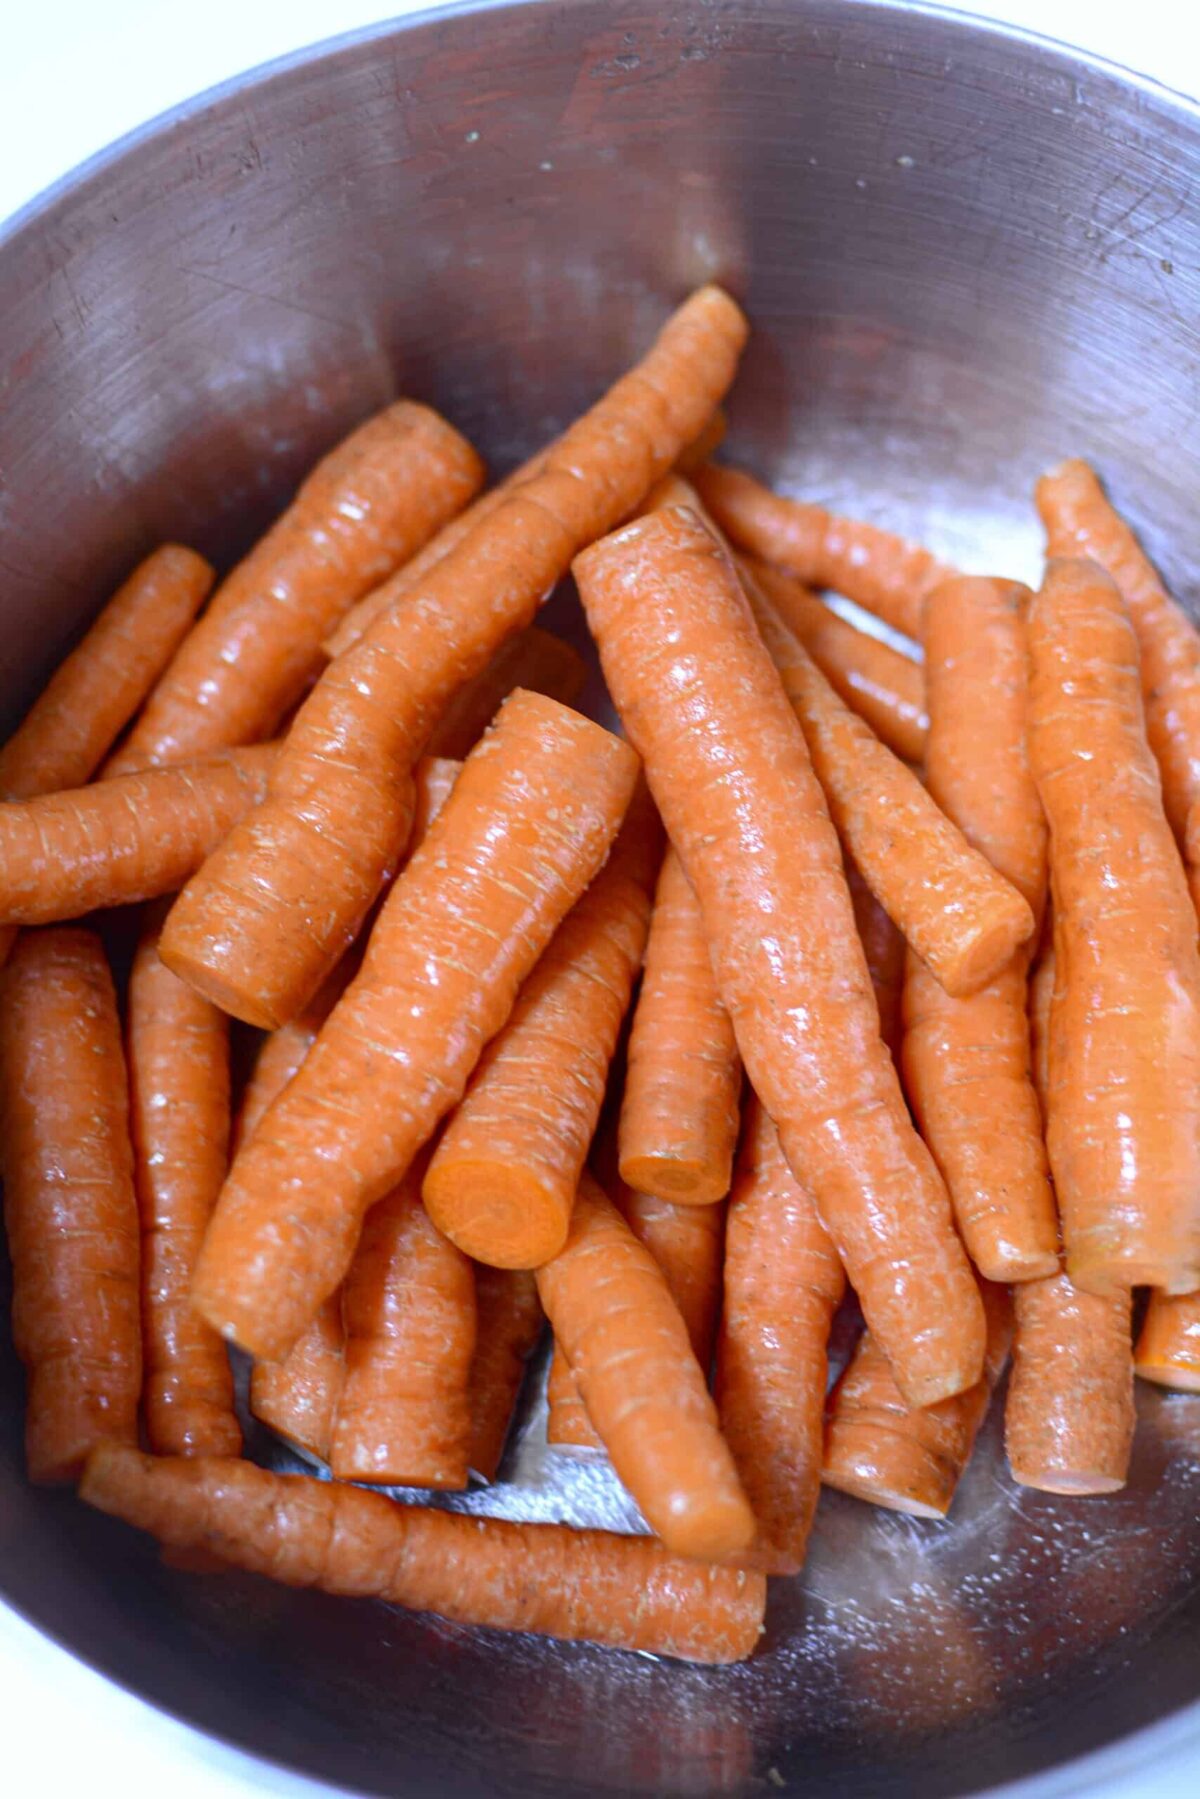 Fresh carrots in a silver bowl.